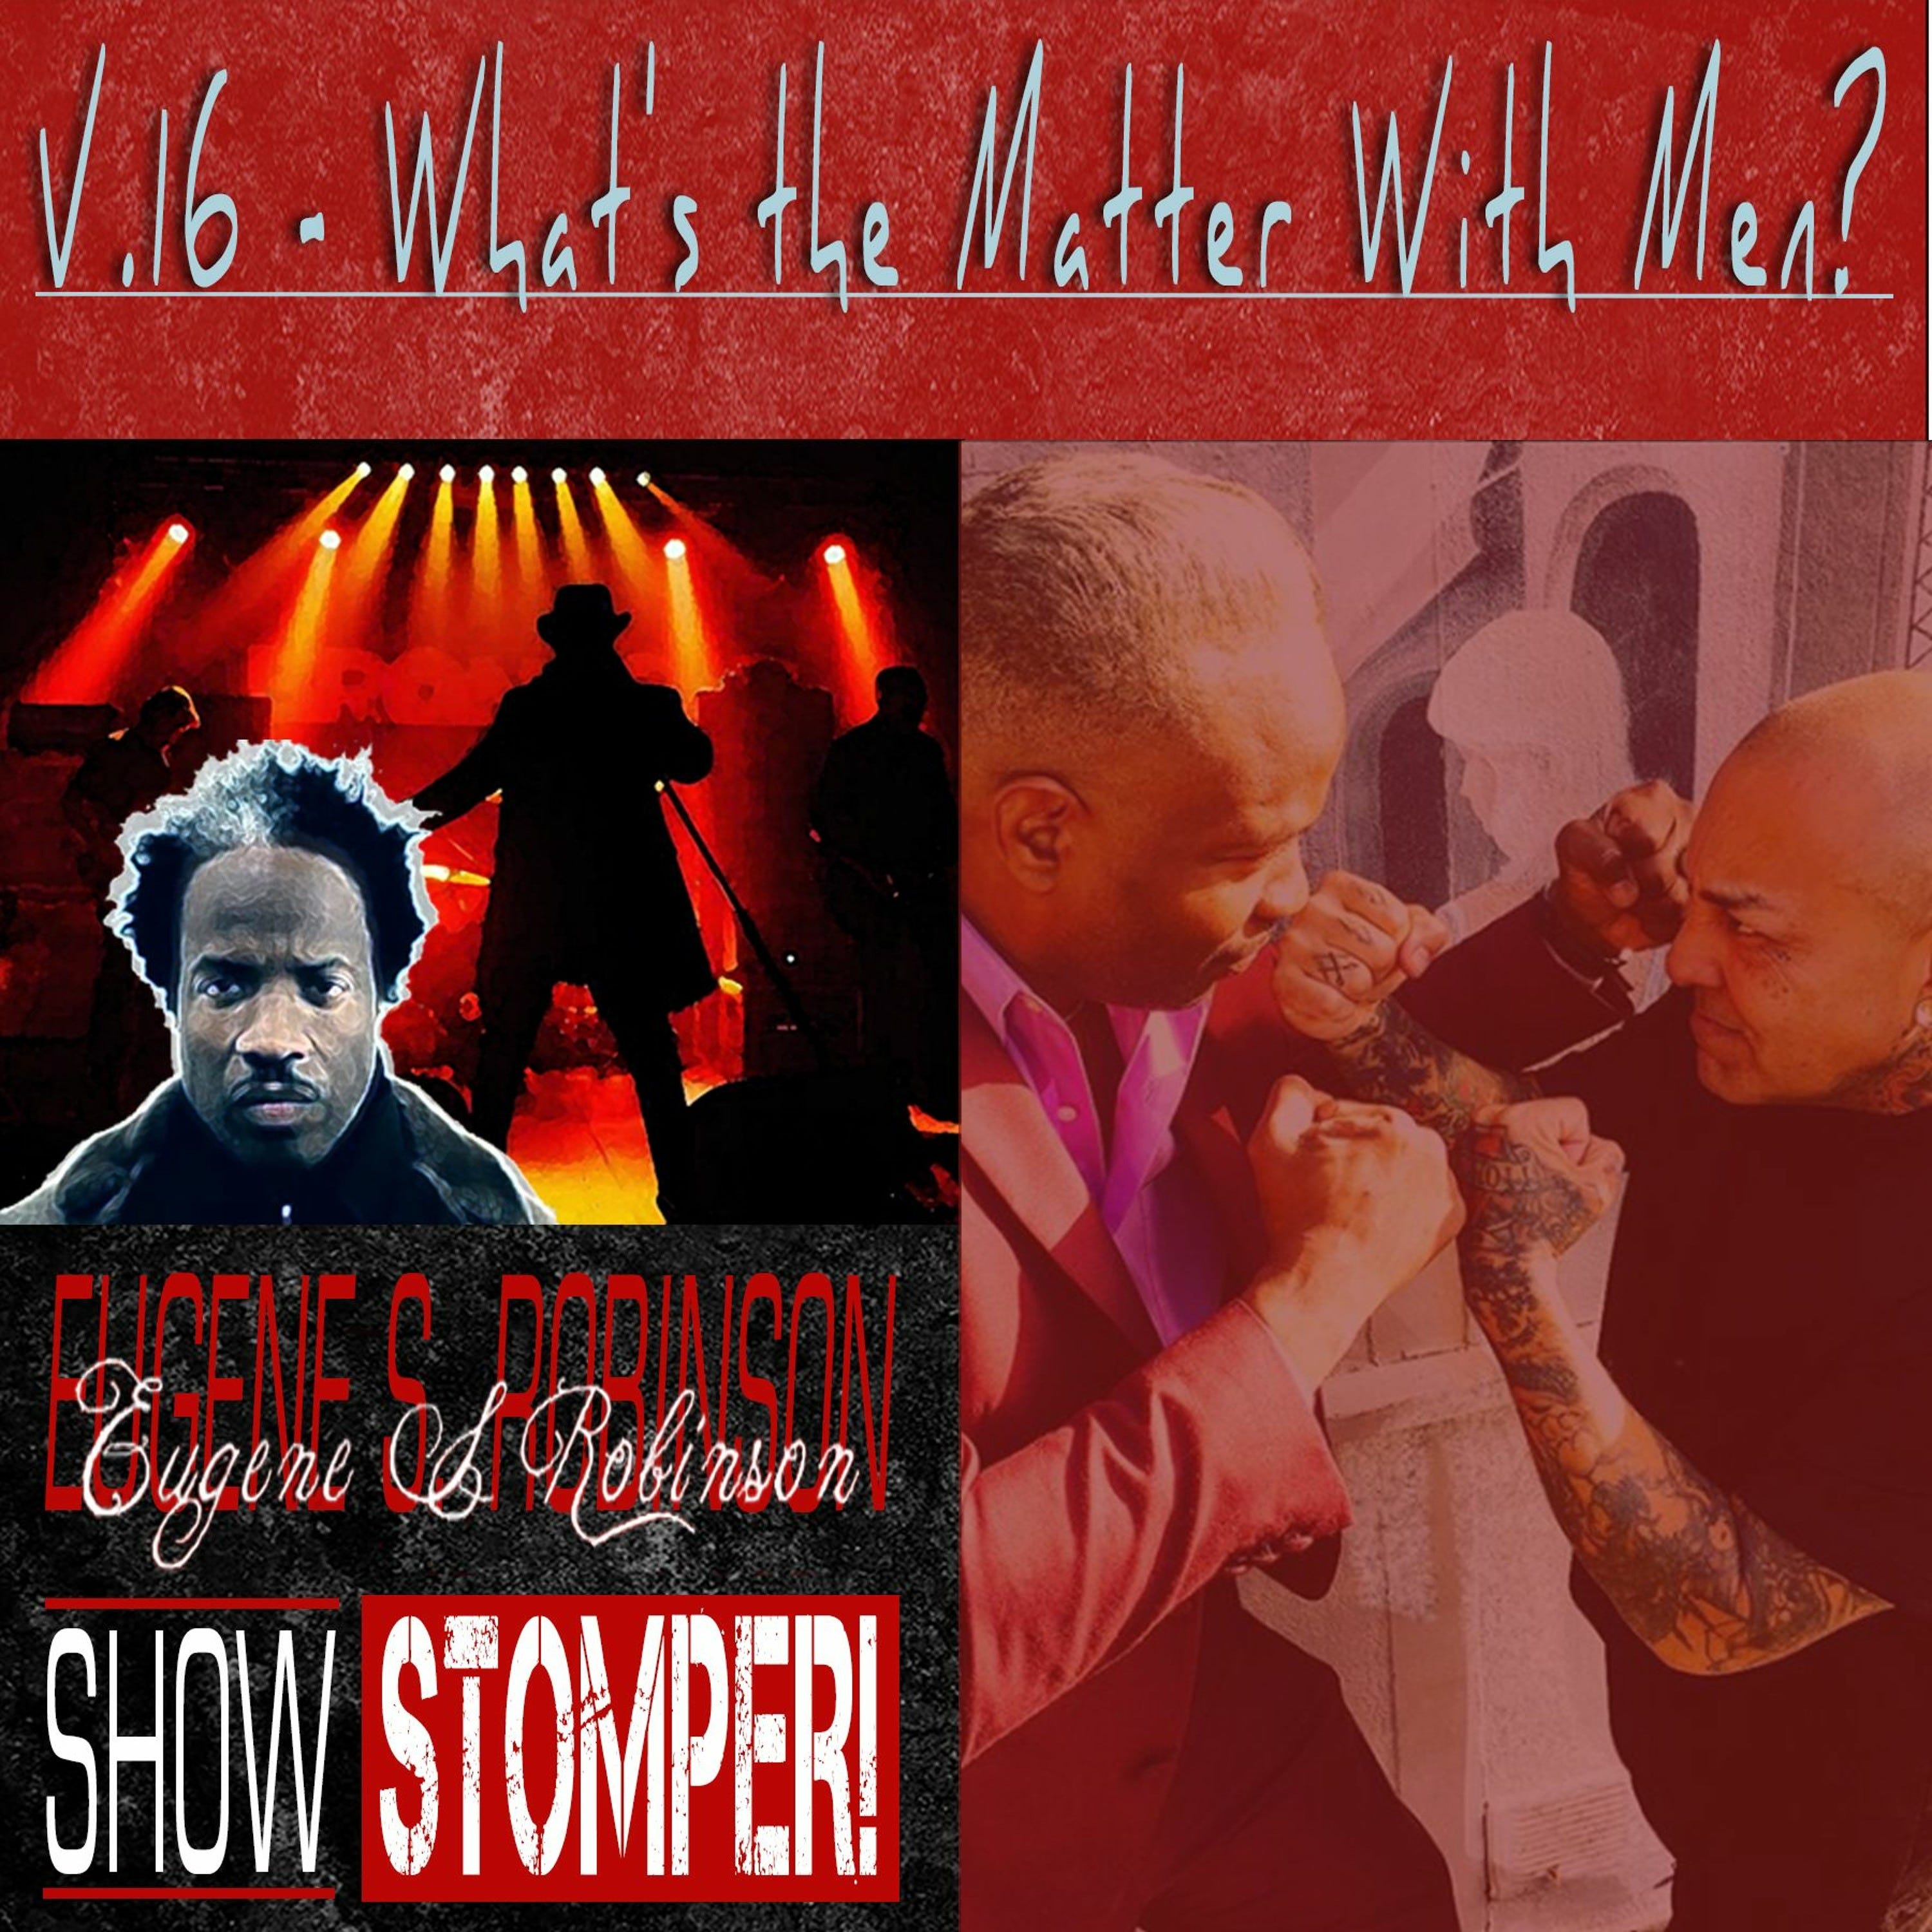 The Eugene S. Robinson Show Stomper! V.16 - What's The Matter With Men?